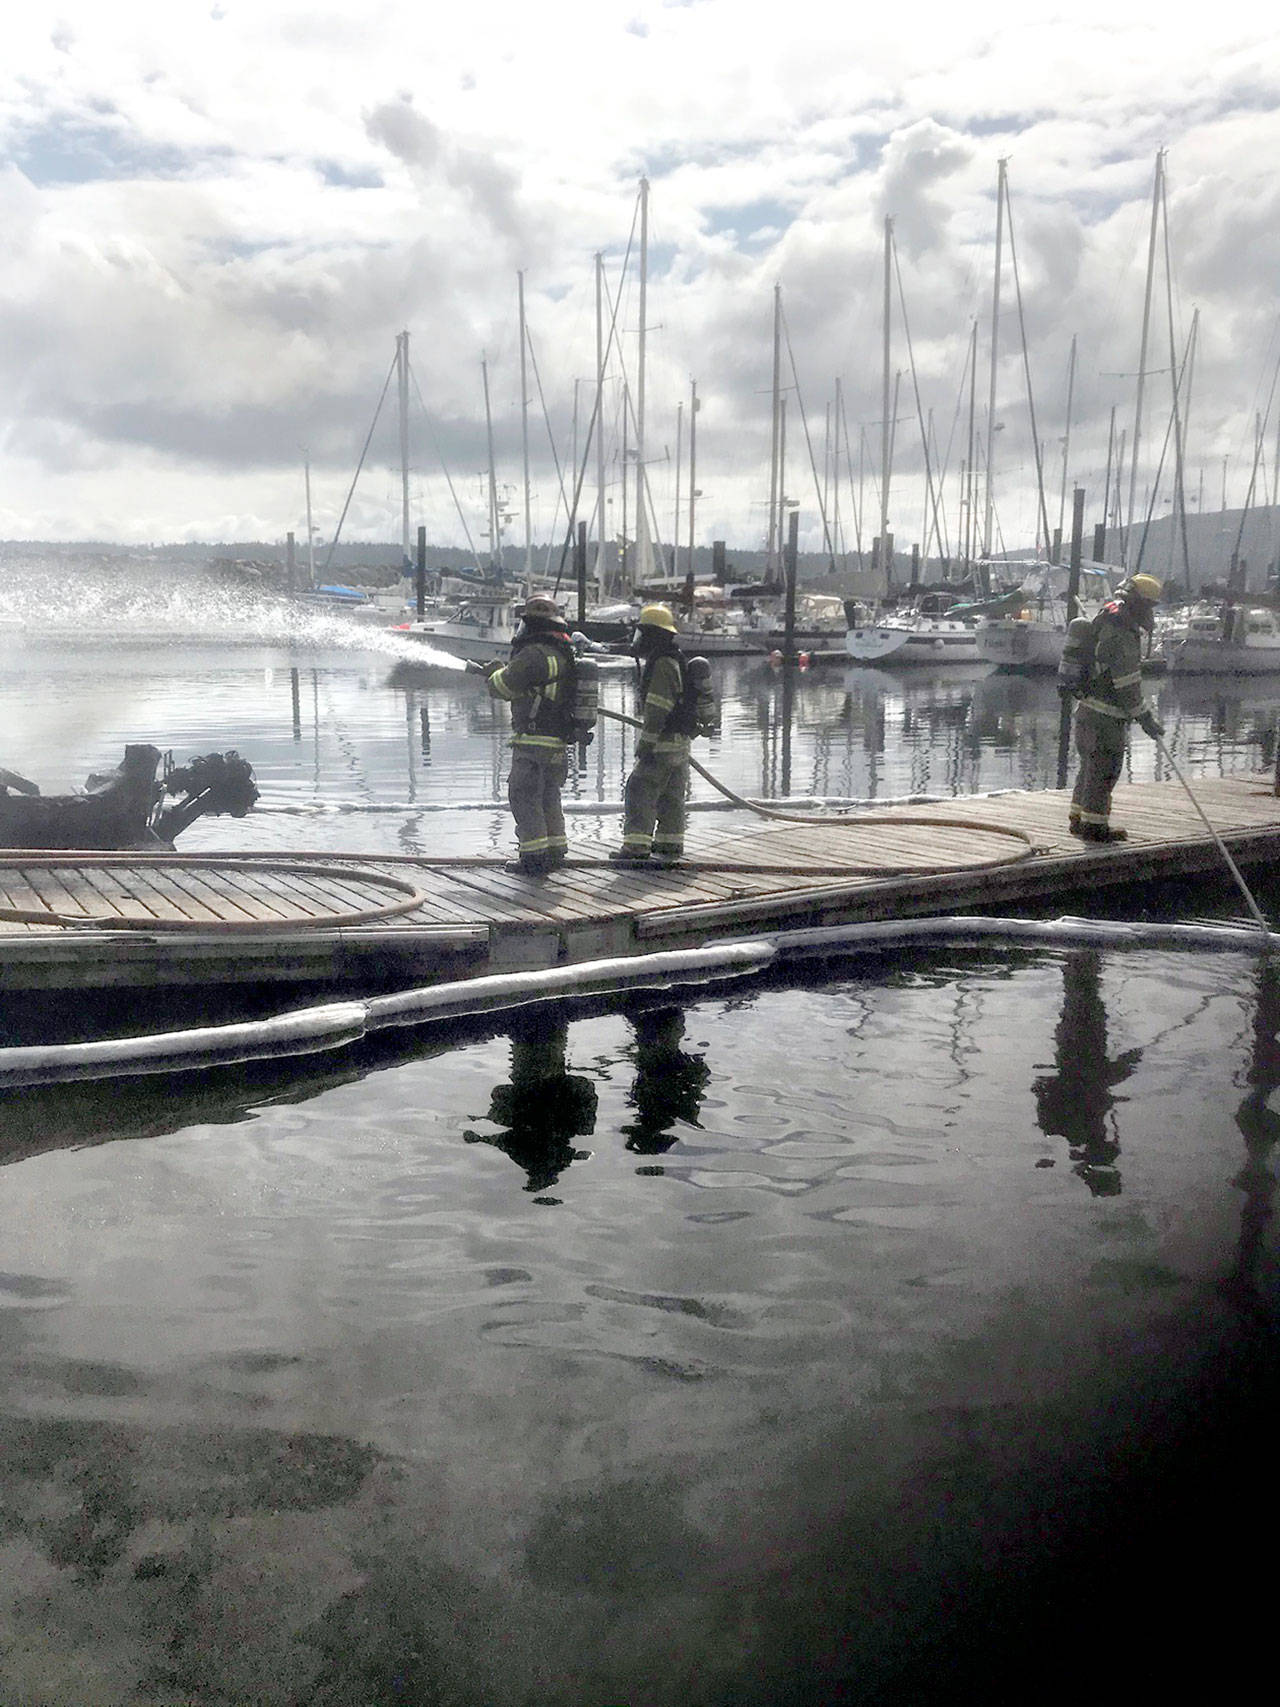 Clallam County Fire District No. 3 firefighters Chad Cate, Colton McGuffey and Bo Pinnel fight a boat fire at John Wayne Marina Saturday morning. Photo courtesy of Clallam County Fire District No. 3                                Clallam County Fire District No. 3 firefighters Chad Cate, Colton McGuffey and Bo Pinnel fight a boat fire at John Wayne Marina Saturday morning. Photo courtesy of Clallam County Fire District No. 3